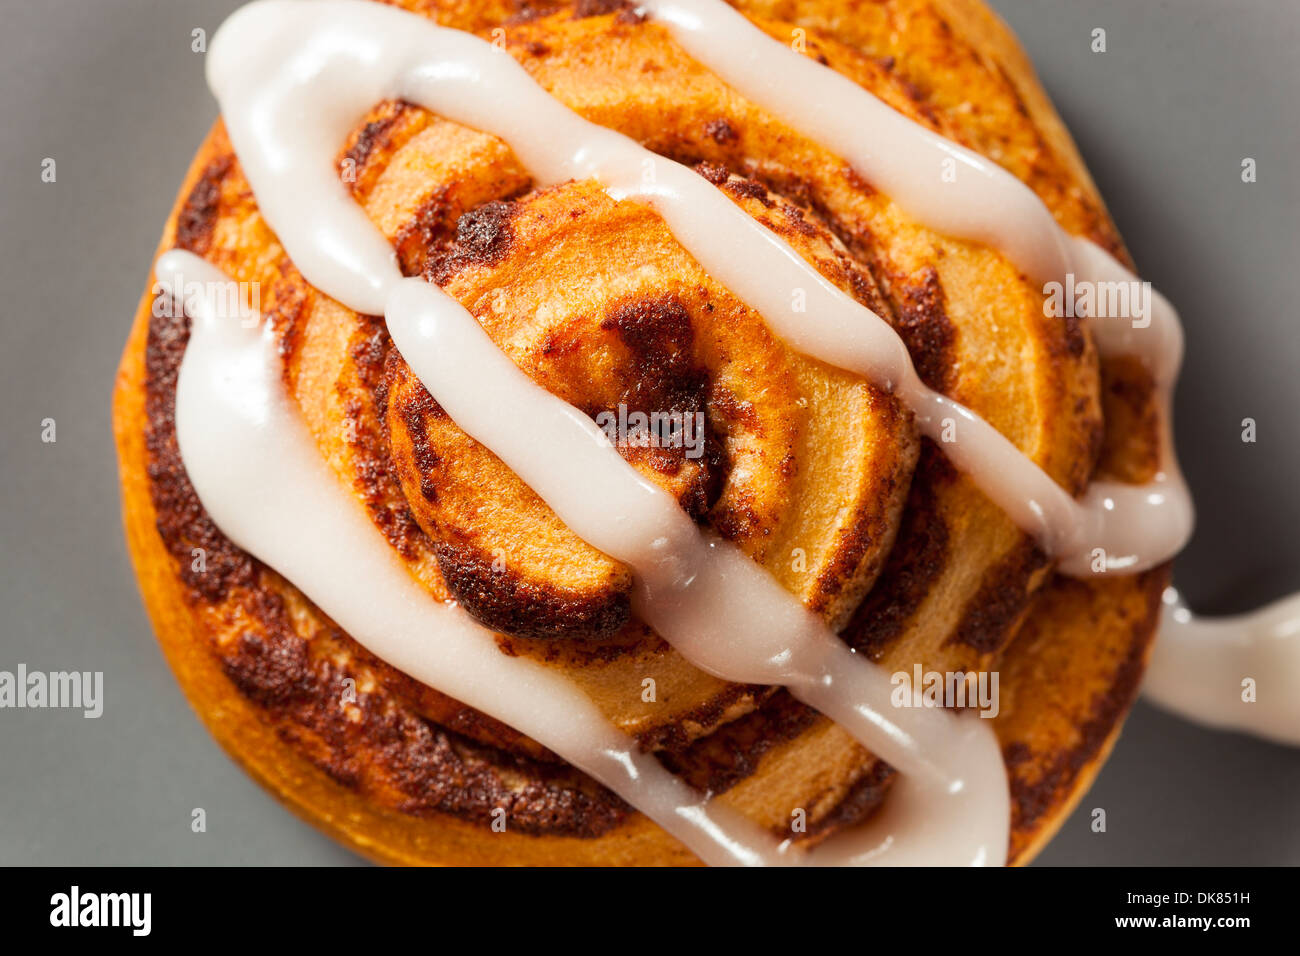 Homemade Cinnamon Roll Pastry with Vanilla Icing Stock Photo